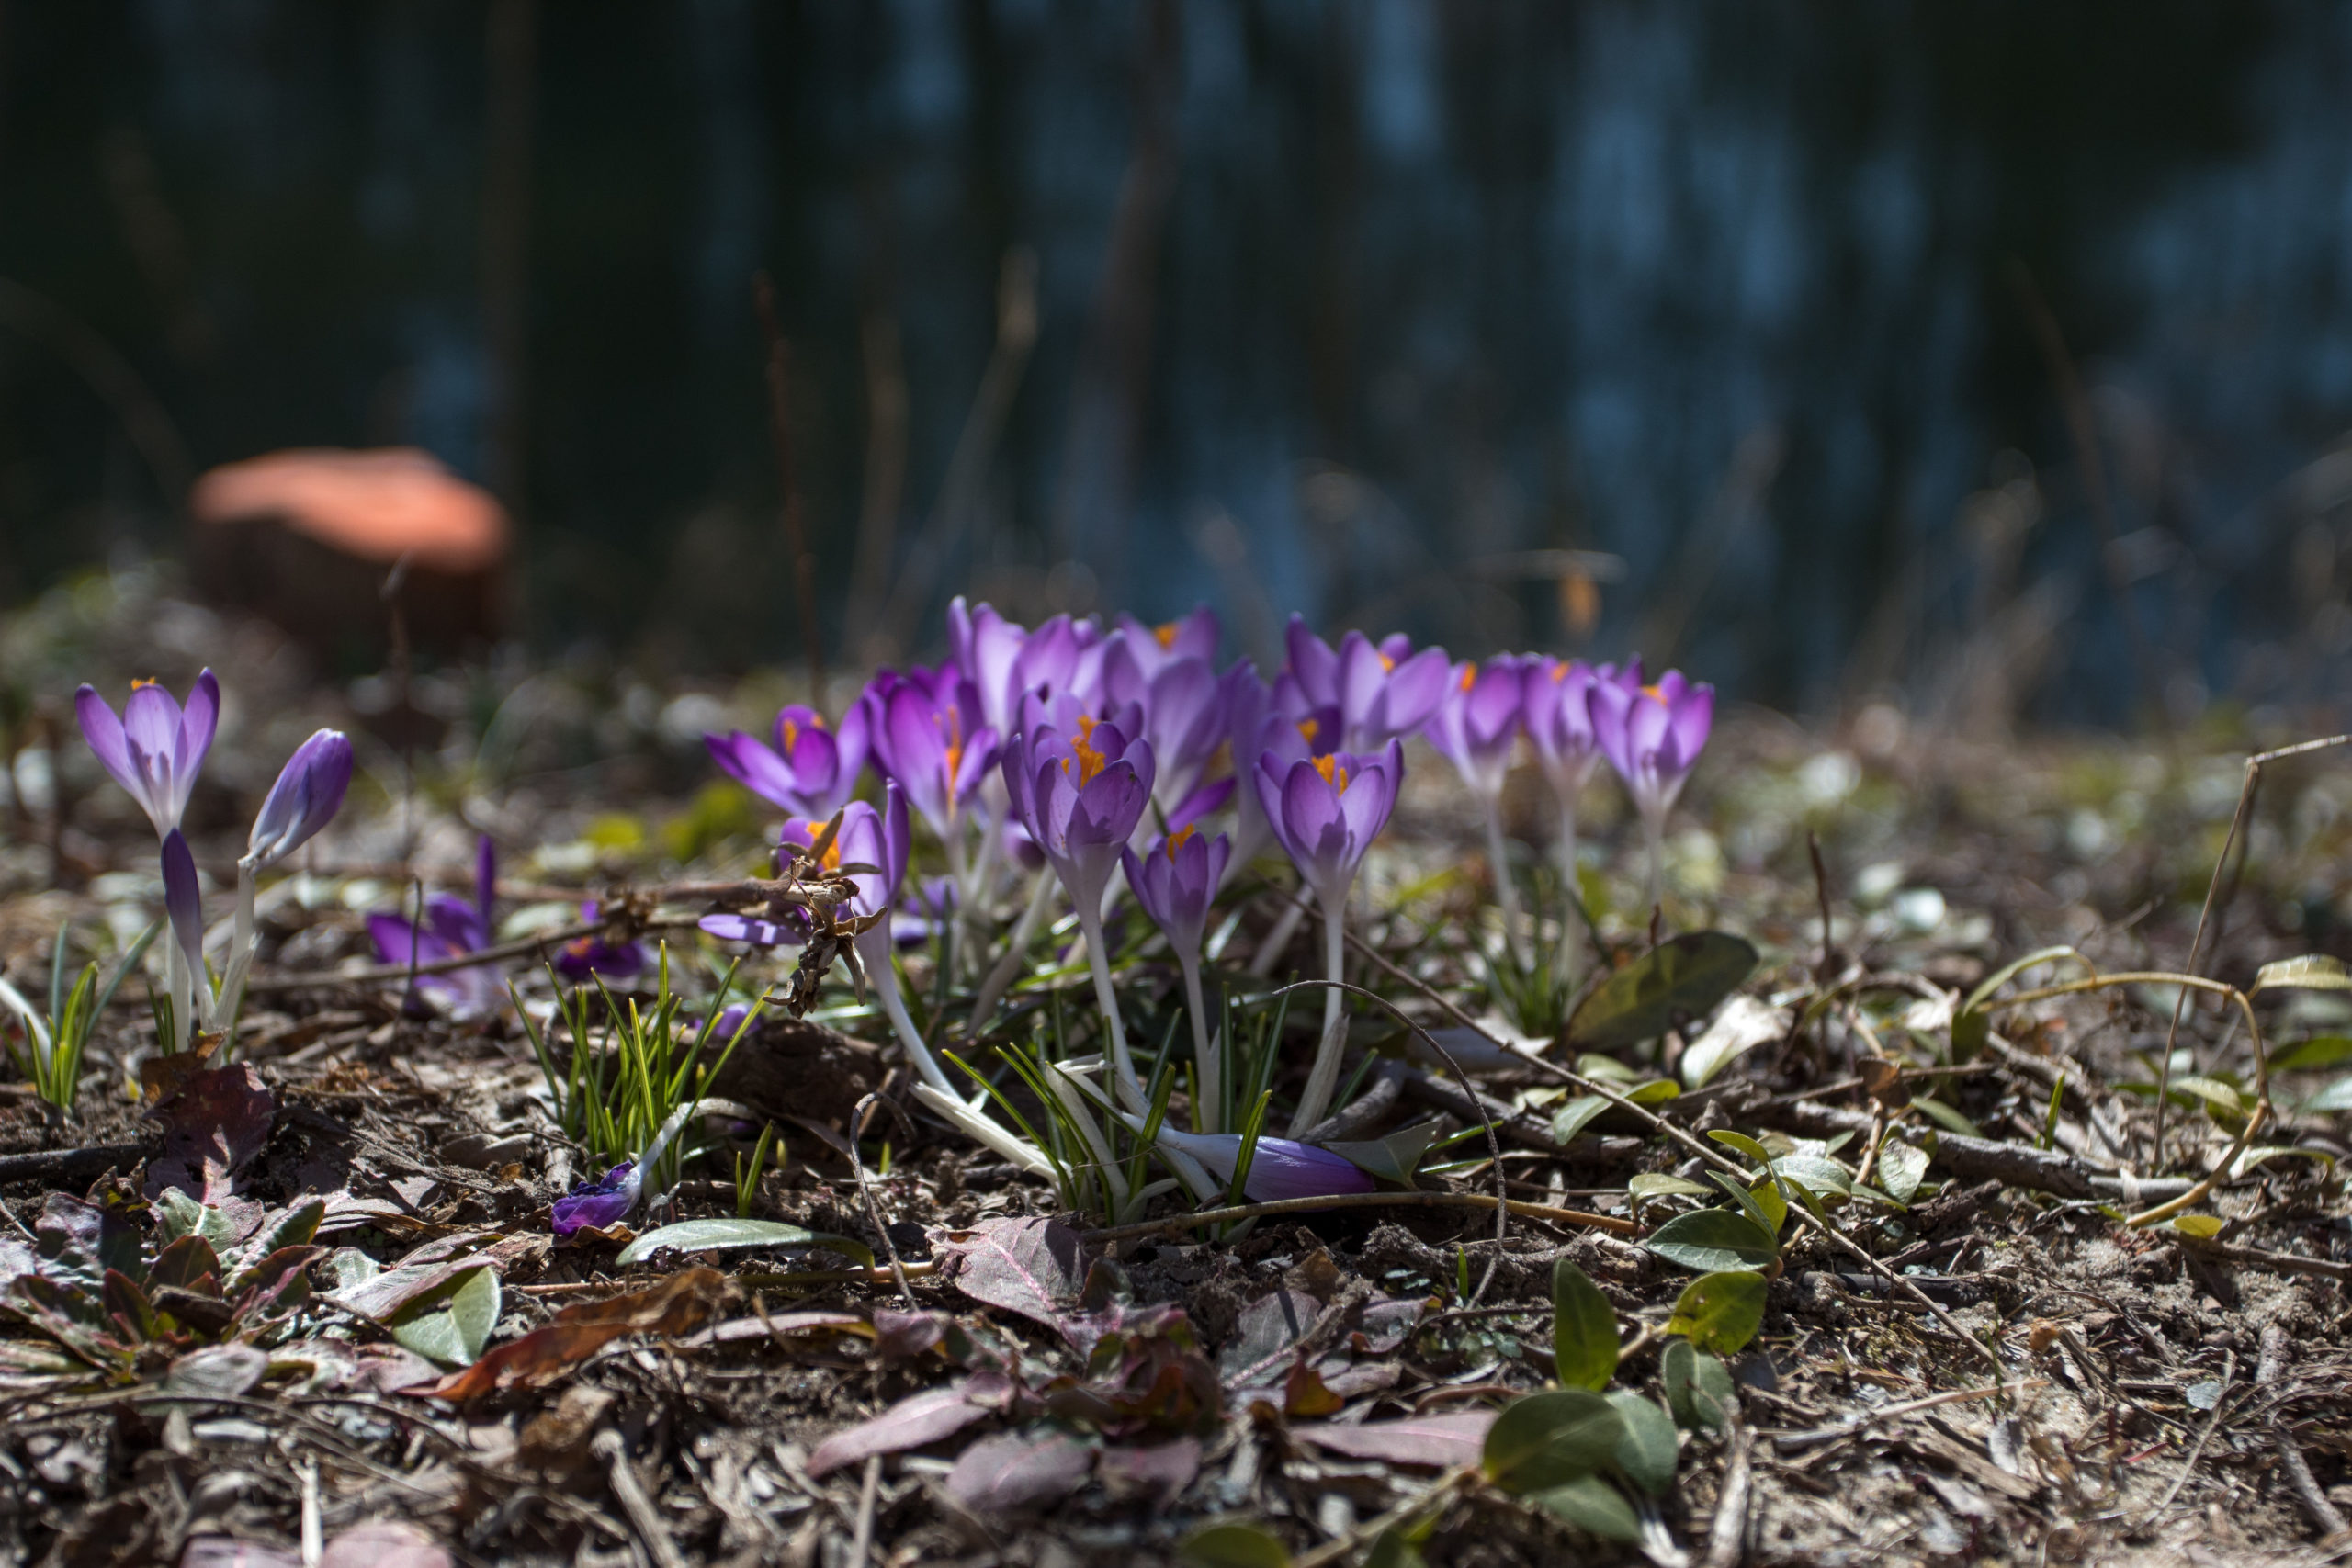 Spring is in the air and flowers are once again in bloom! Photo via multimedia editor/Alex Rossen